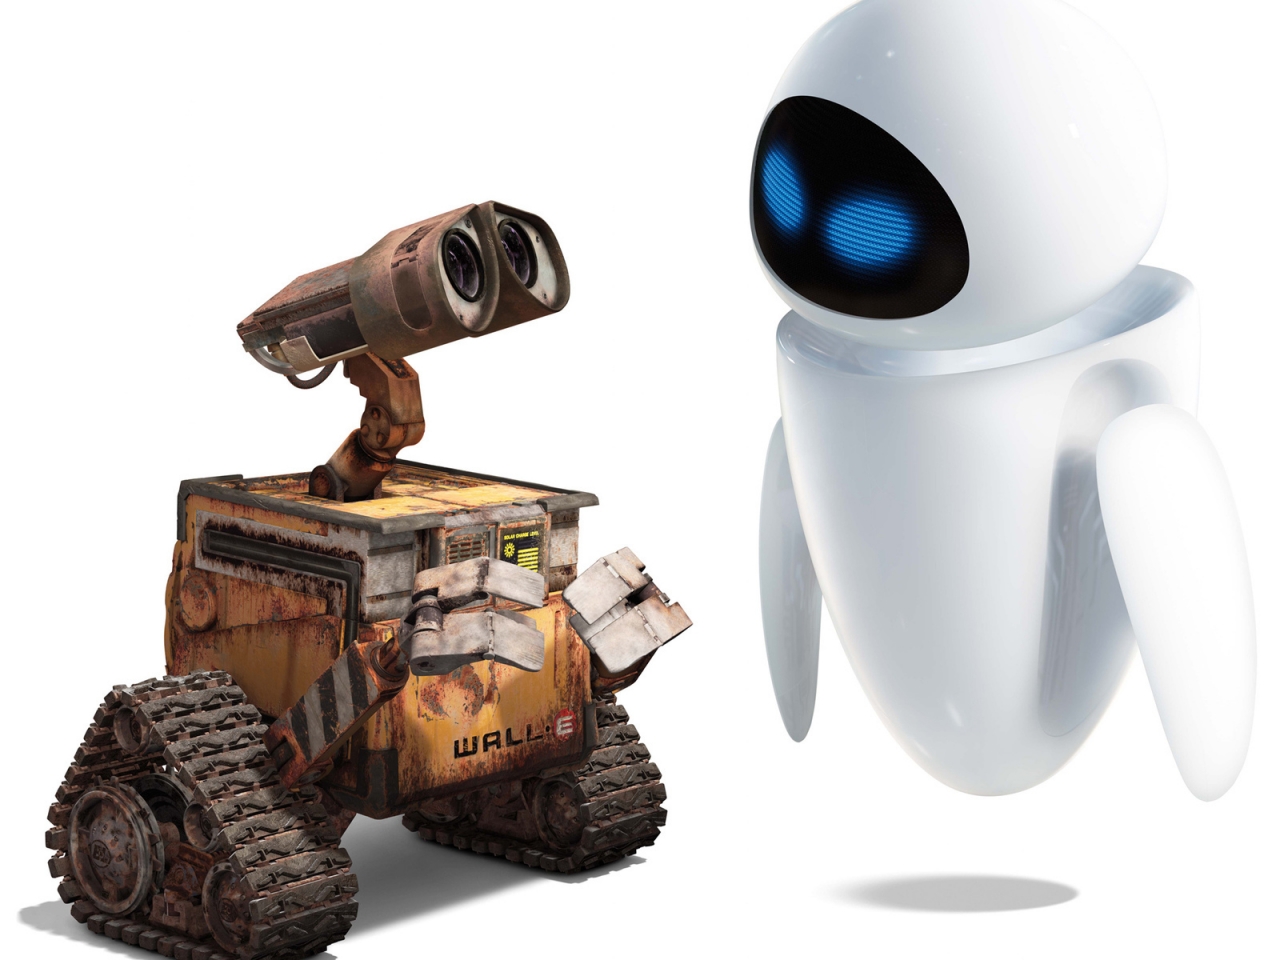 Walle Robots for 1280 x 960 resolution